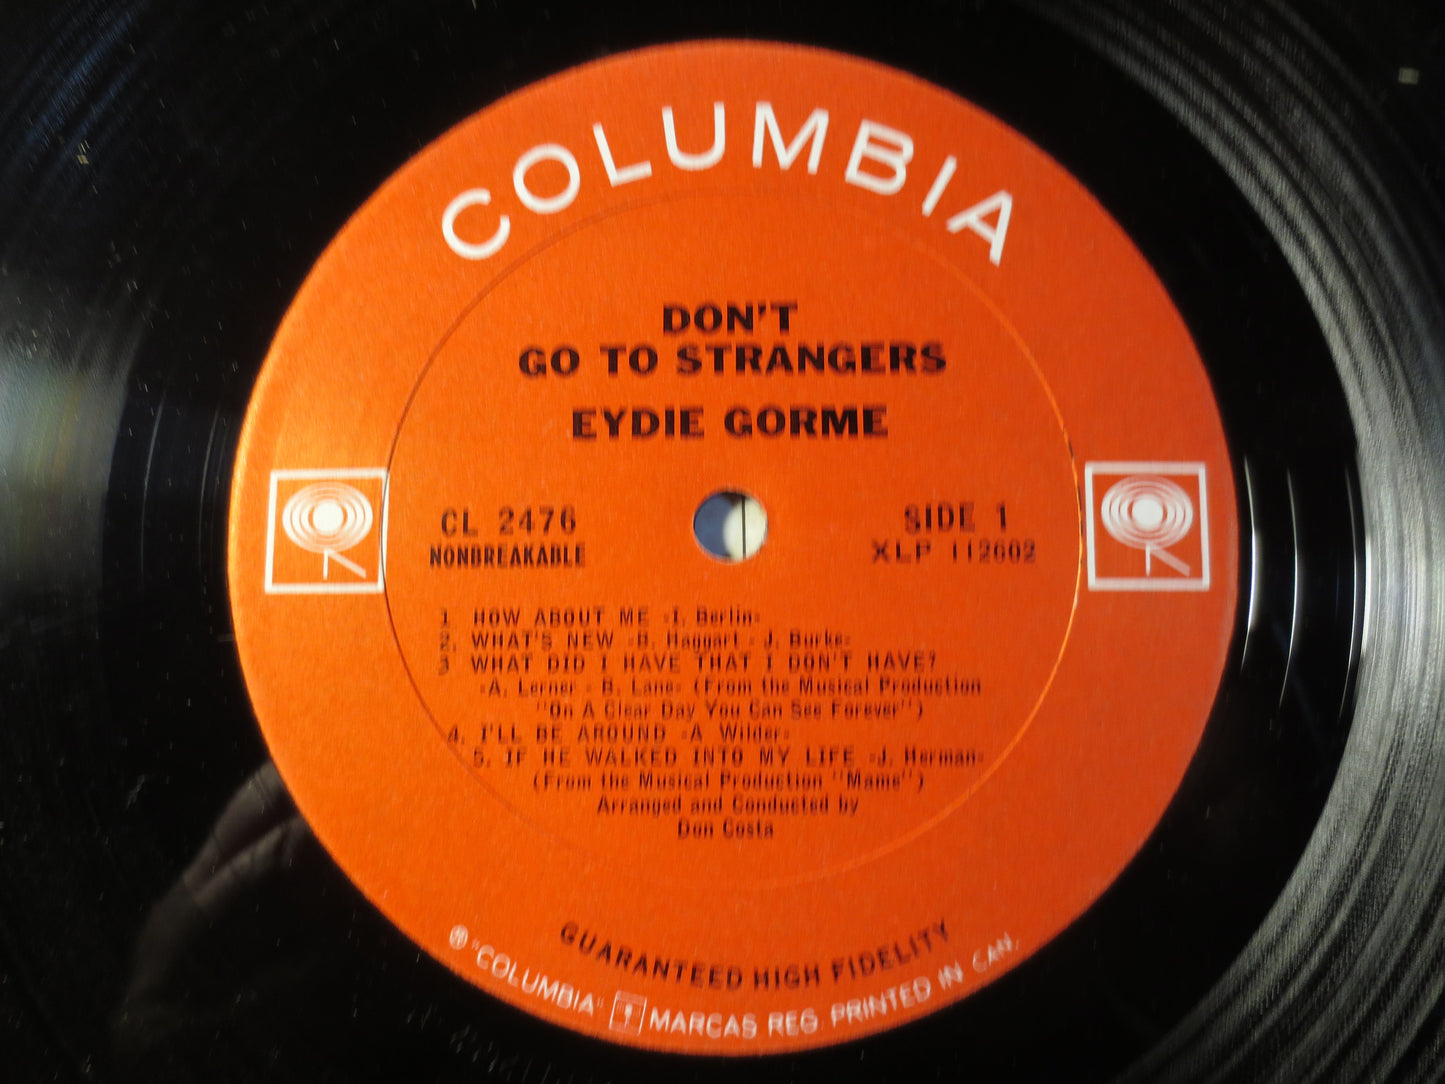 EYDIE GORME, Don't Go To STRANGERS, Pop Records, Vintage Vinyl, Record Vinyl, Records, Vinyl Records, Vinyl, 1966 Records